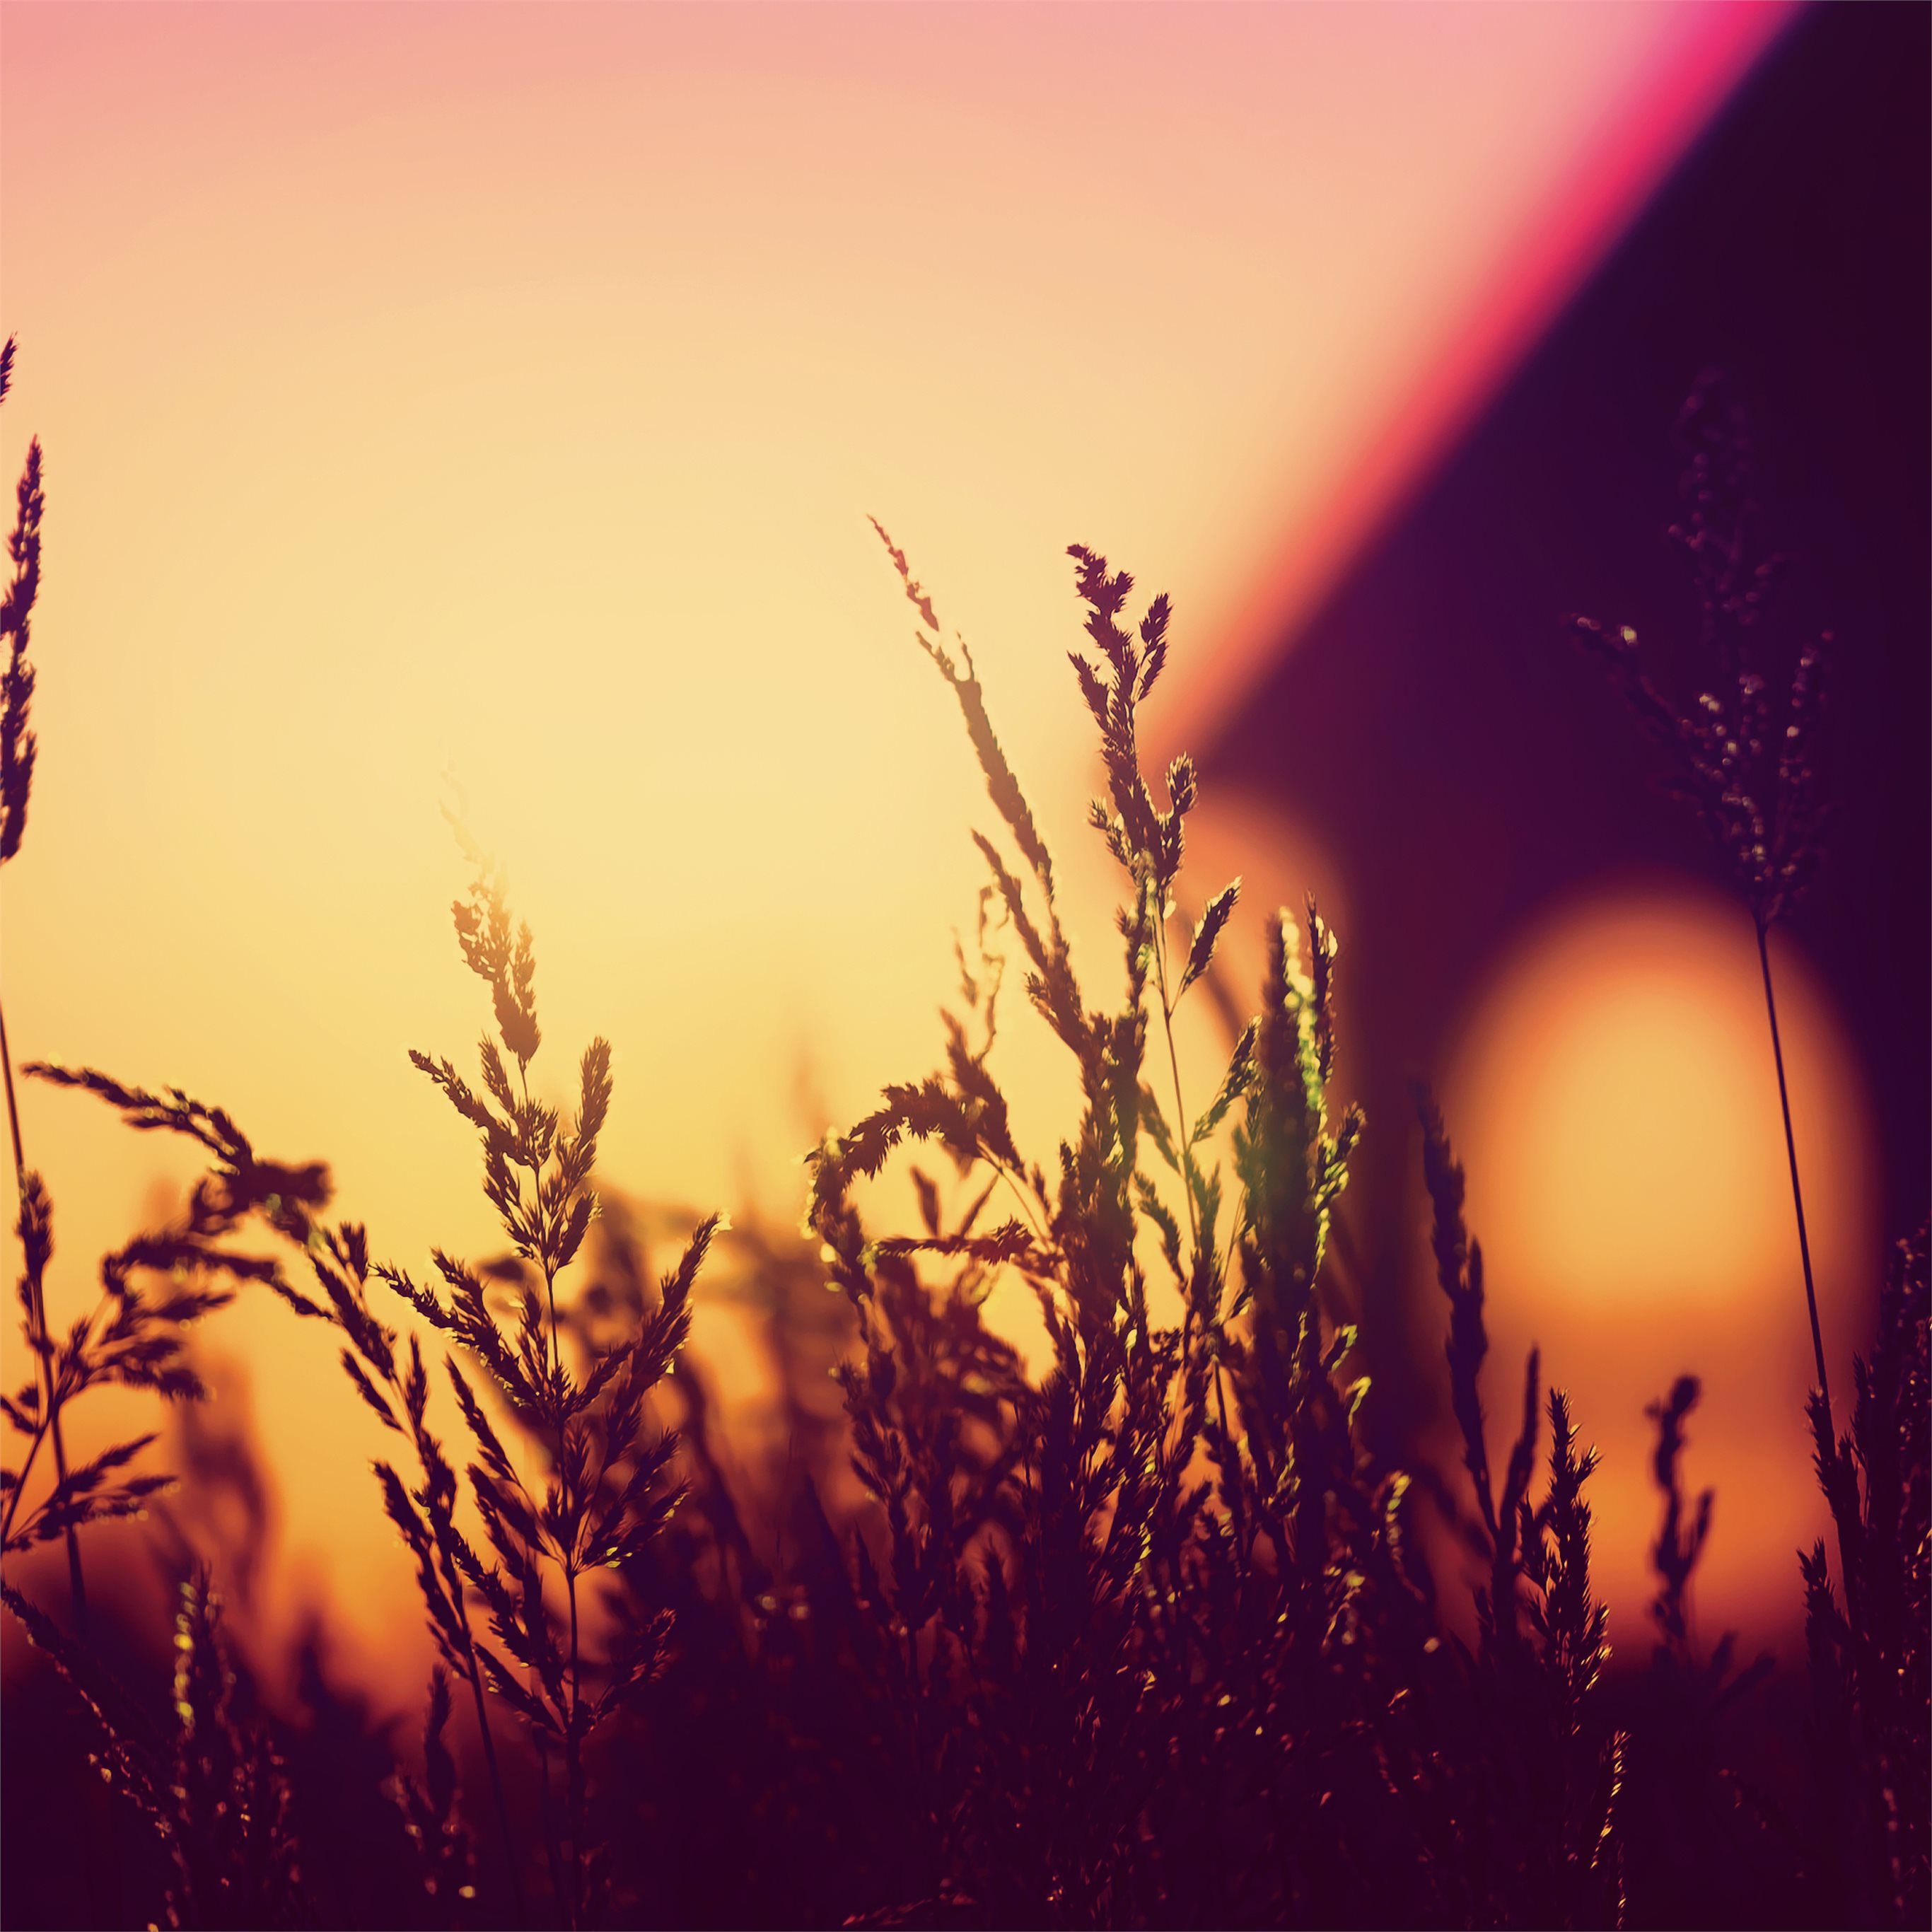 plants blurred silhouette sunset 4k iPad Air Wallpaper Free Download